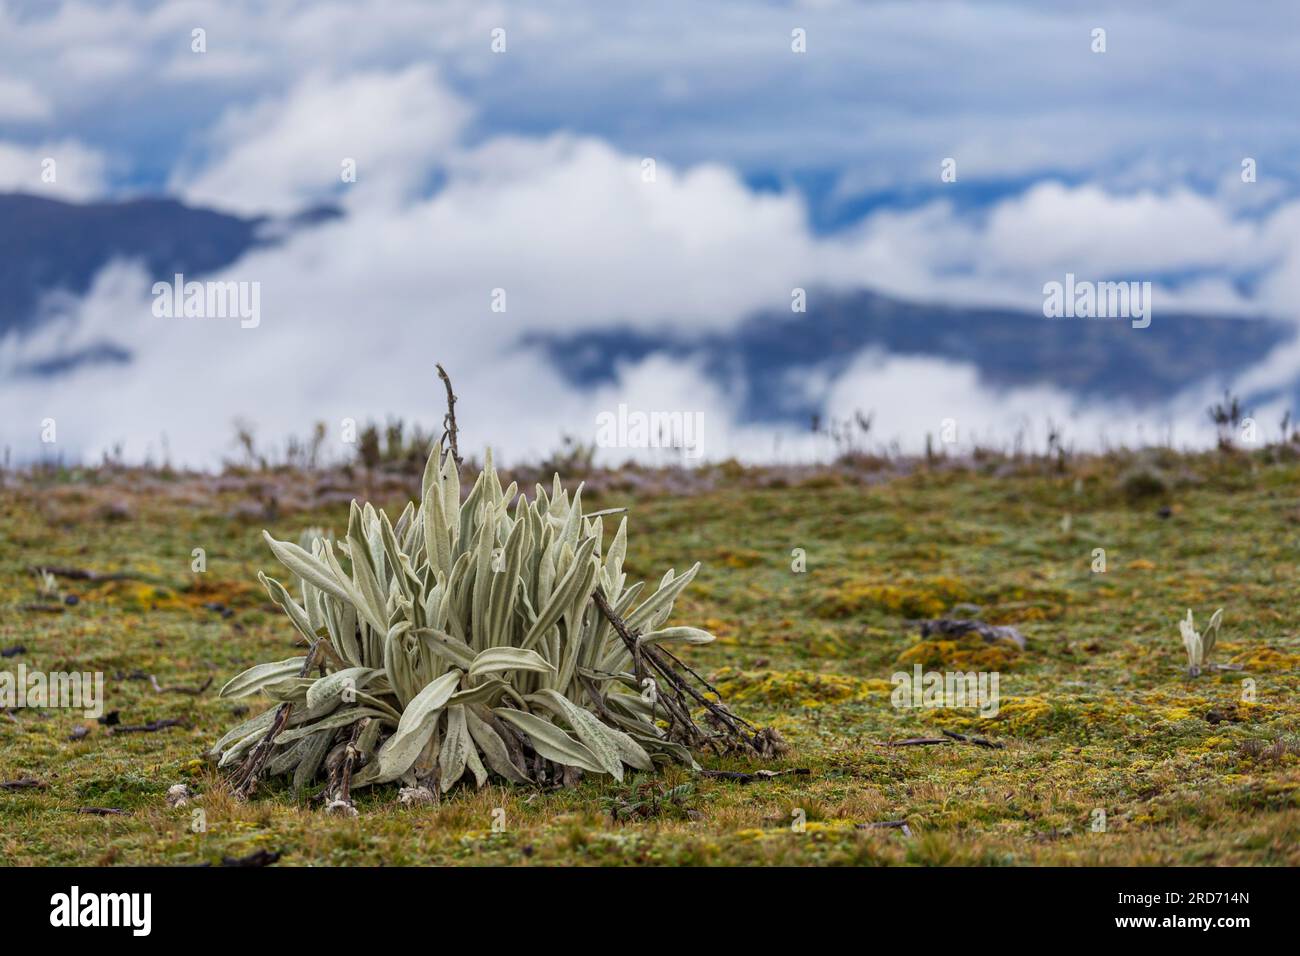 forest of frailejones or Espeletia, a beautiful plant in Colombian mountains, South America Stock Photo